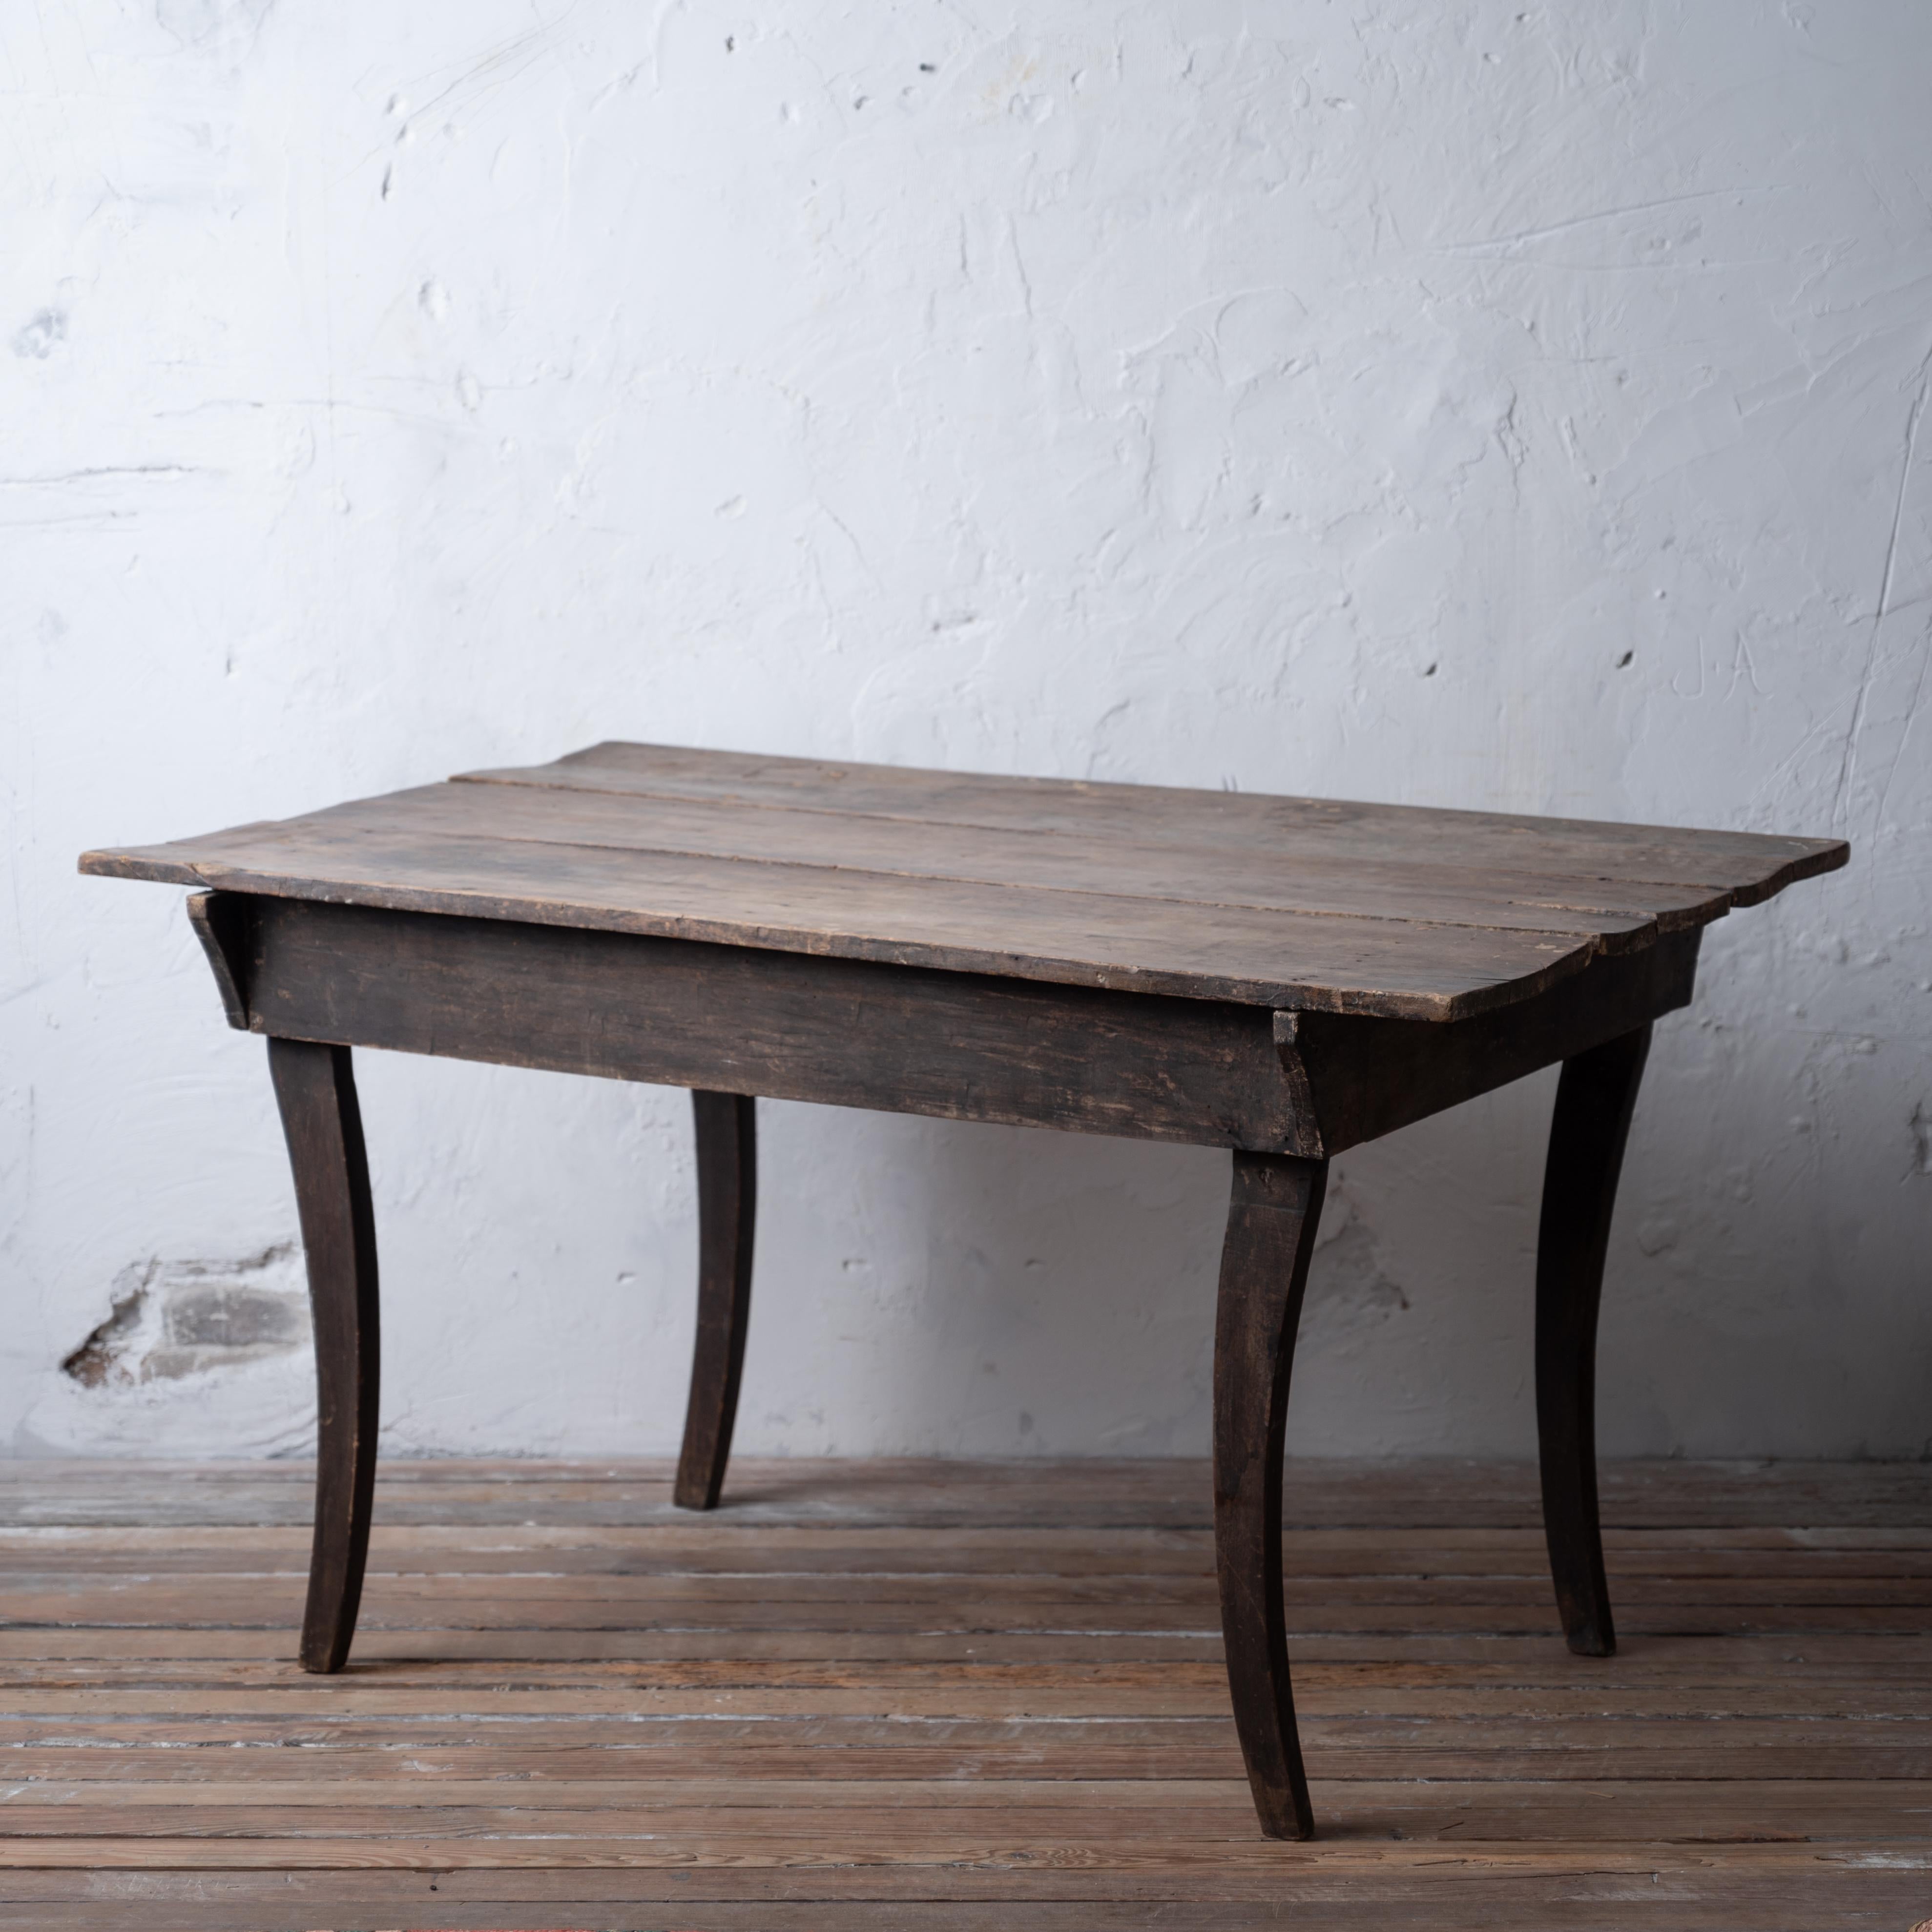 A primitive walnut sabre leg table with early black paint, 19th century.

54 inches wide by 24 ½ inches deep by 30 ¼ inches tall; 23 ¾ knee clearance. 

